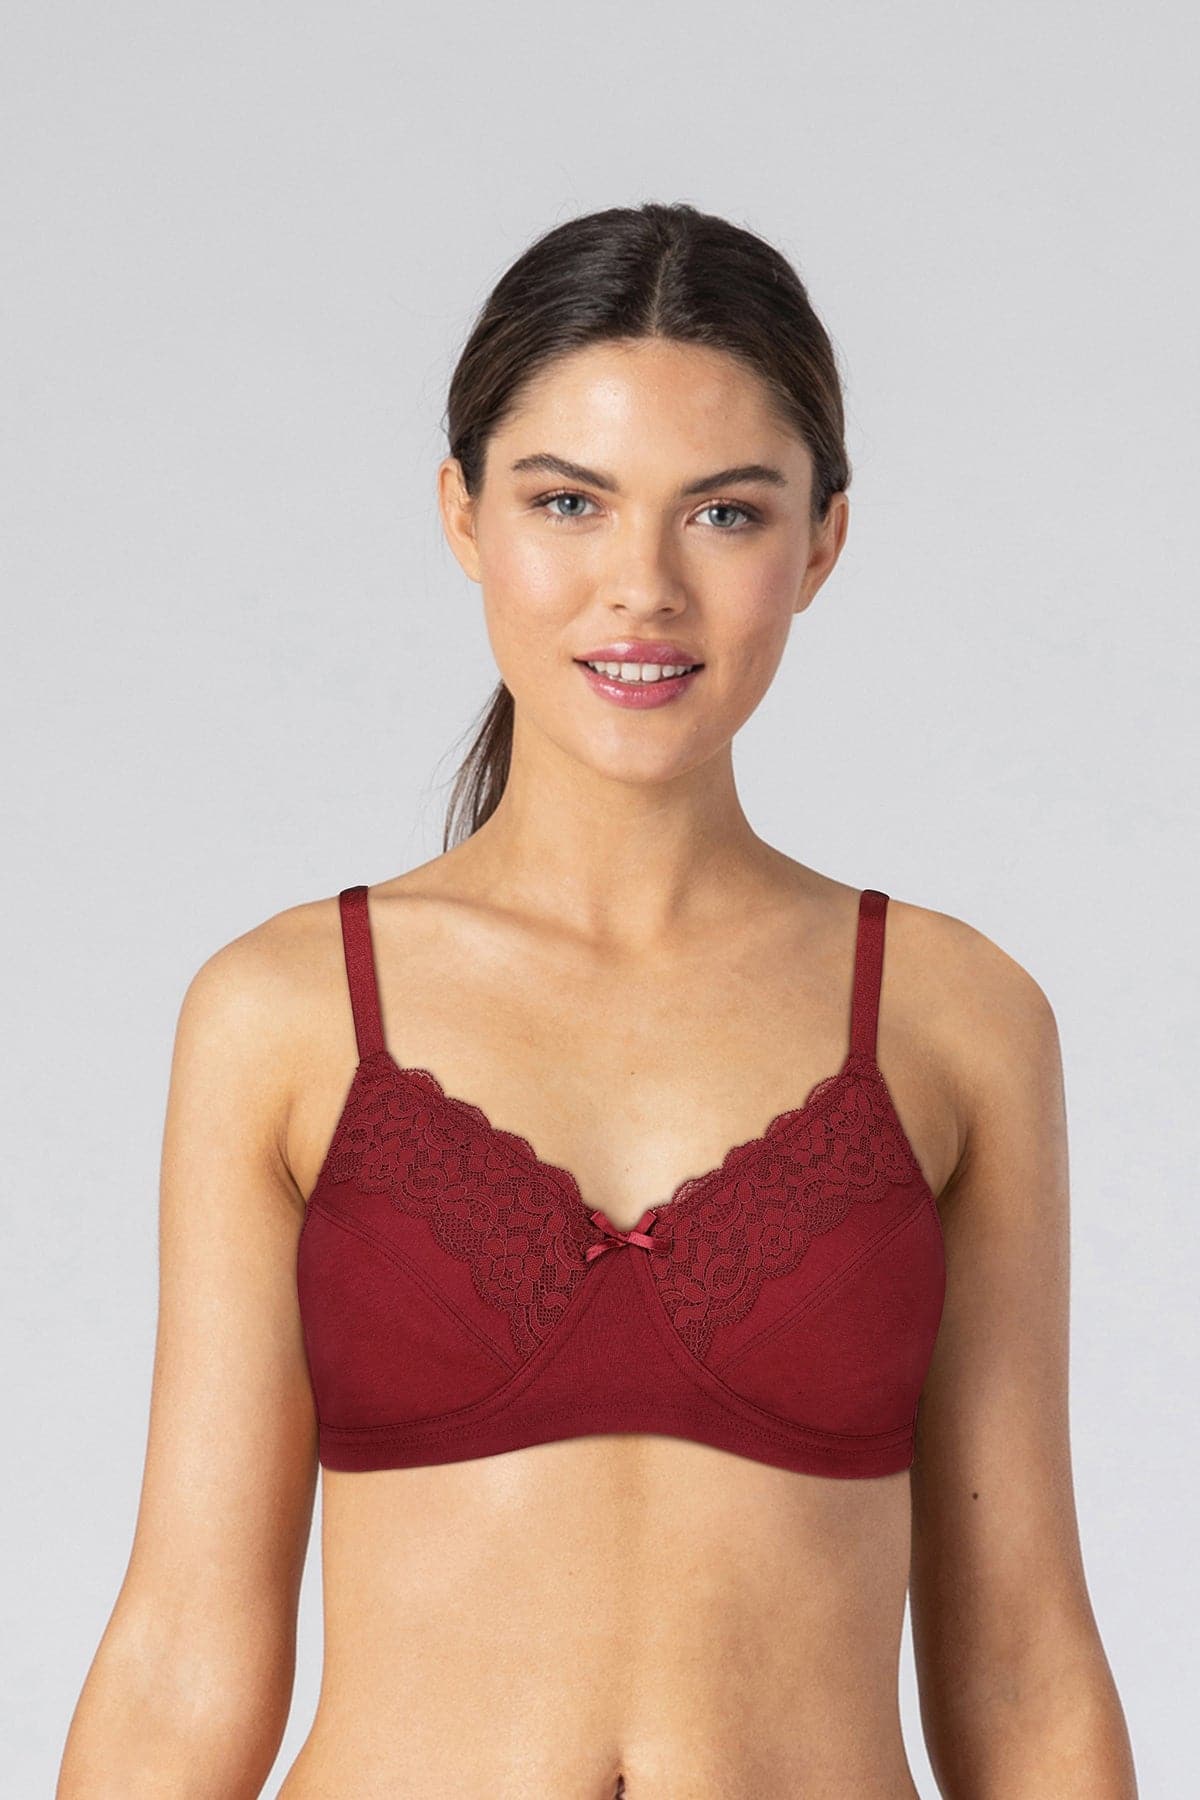 BLS - Cece Non Wired And Non Padded Cotton Bra - Skin – Makeup